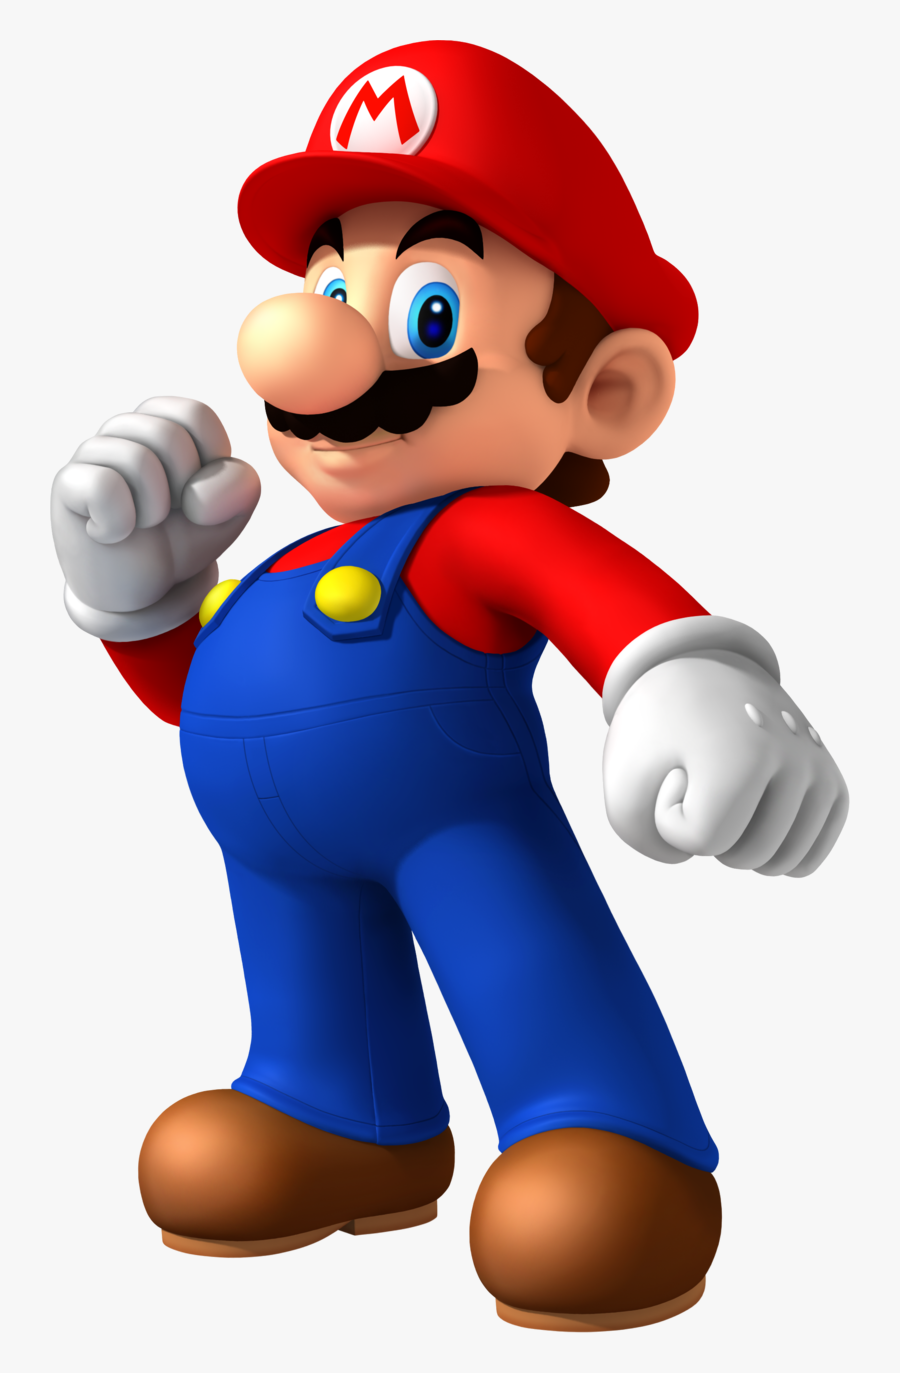 Mario Material Super Toy Bros Png File Hd - Mario Party The Top 100 Mario, Transparent Clipart